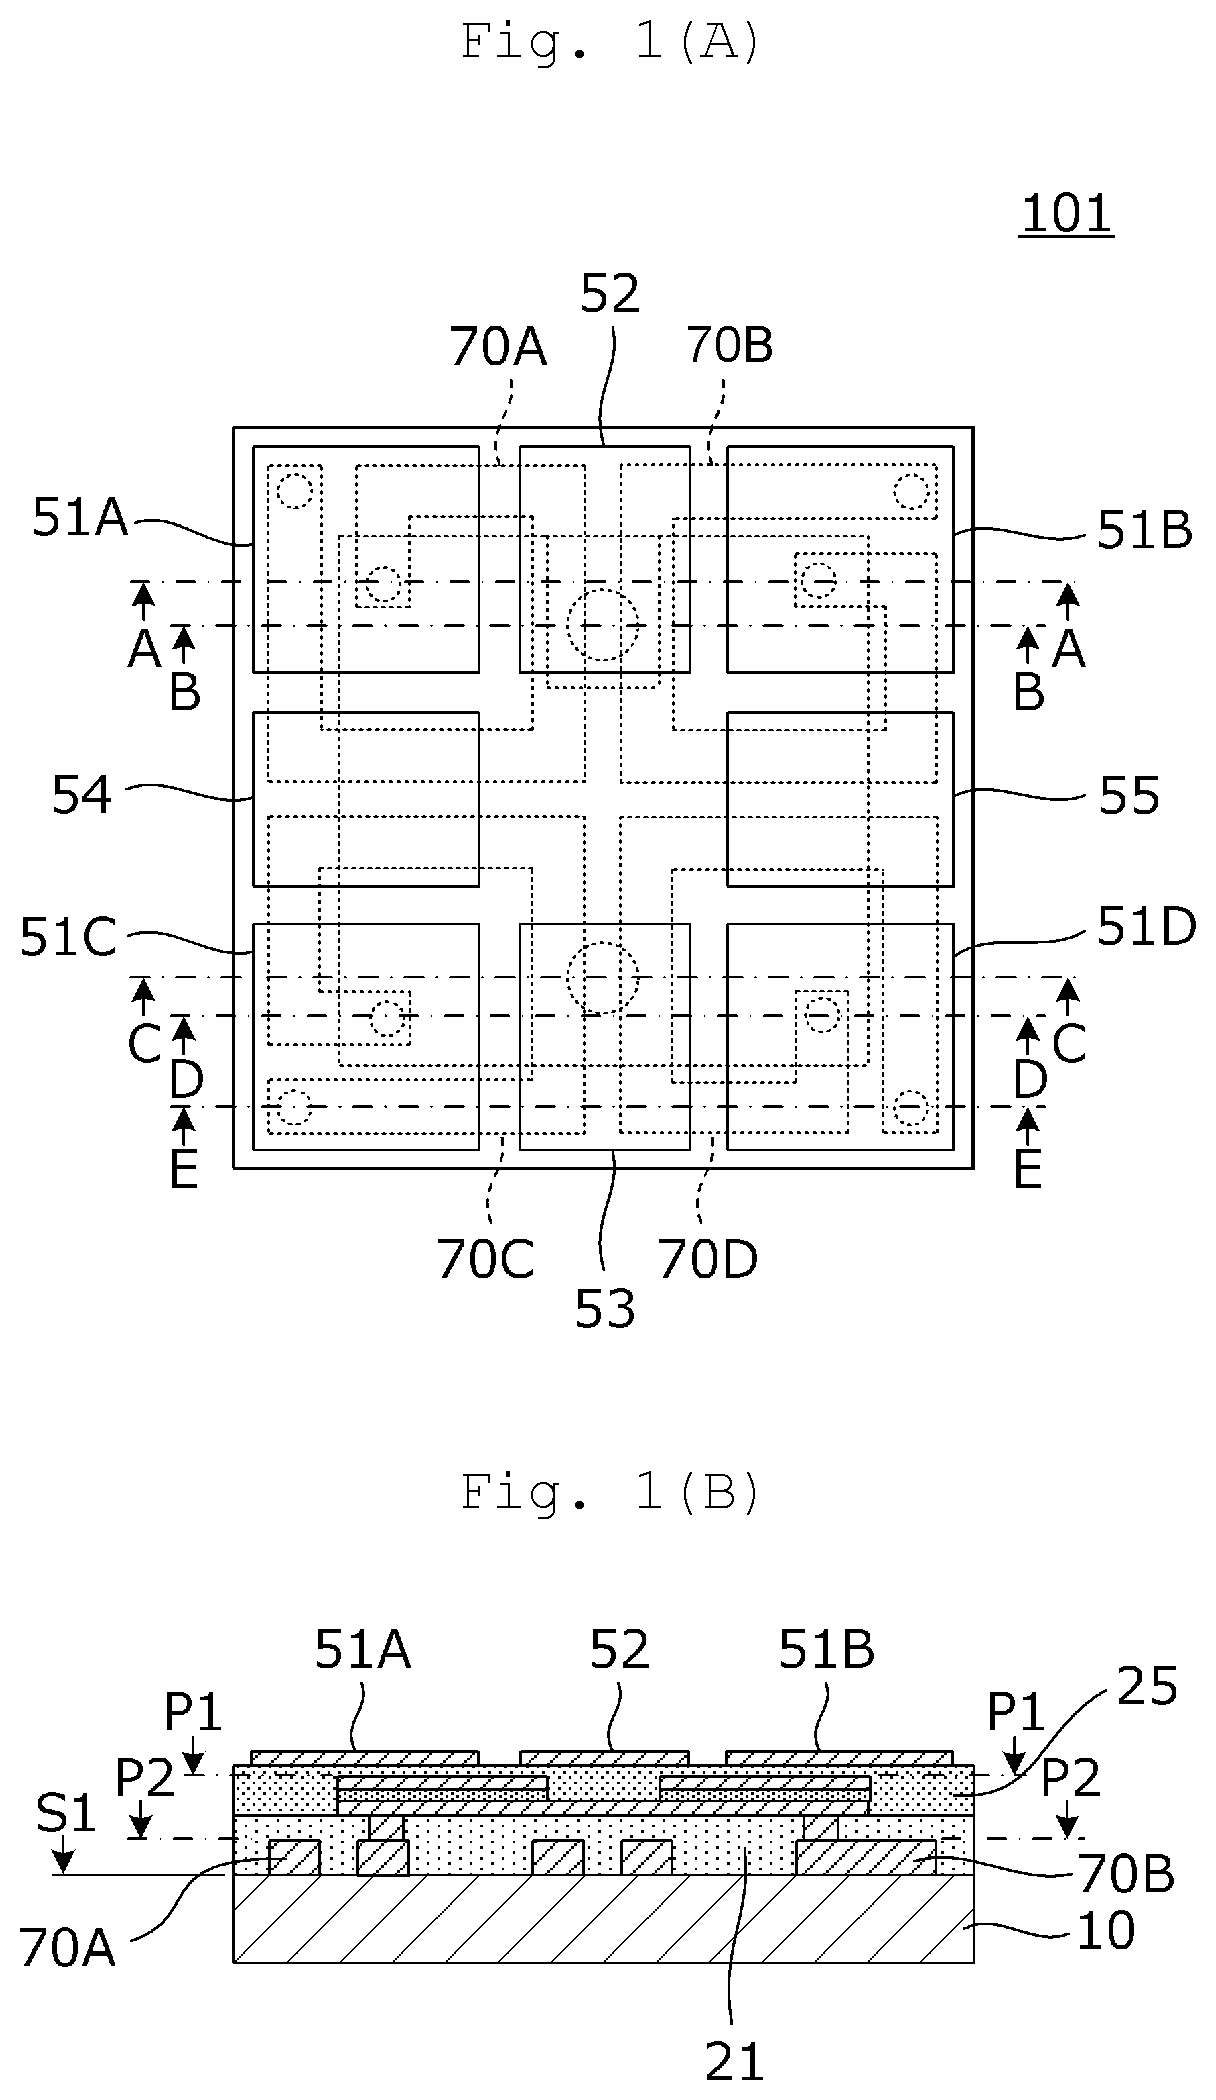 Surface-mounted LC device